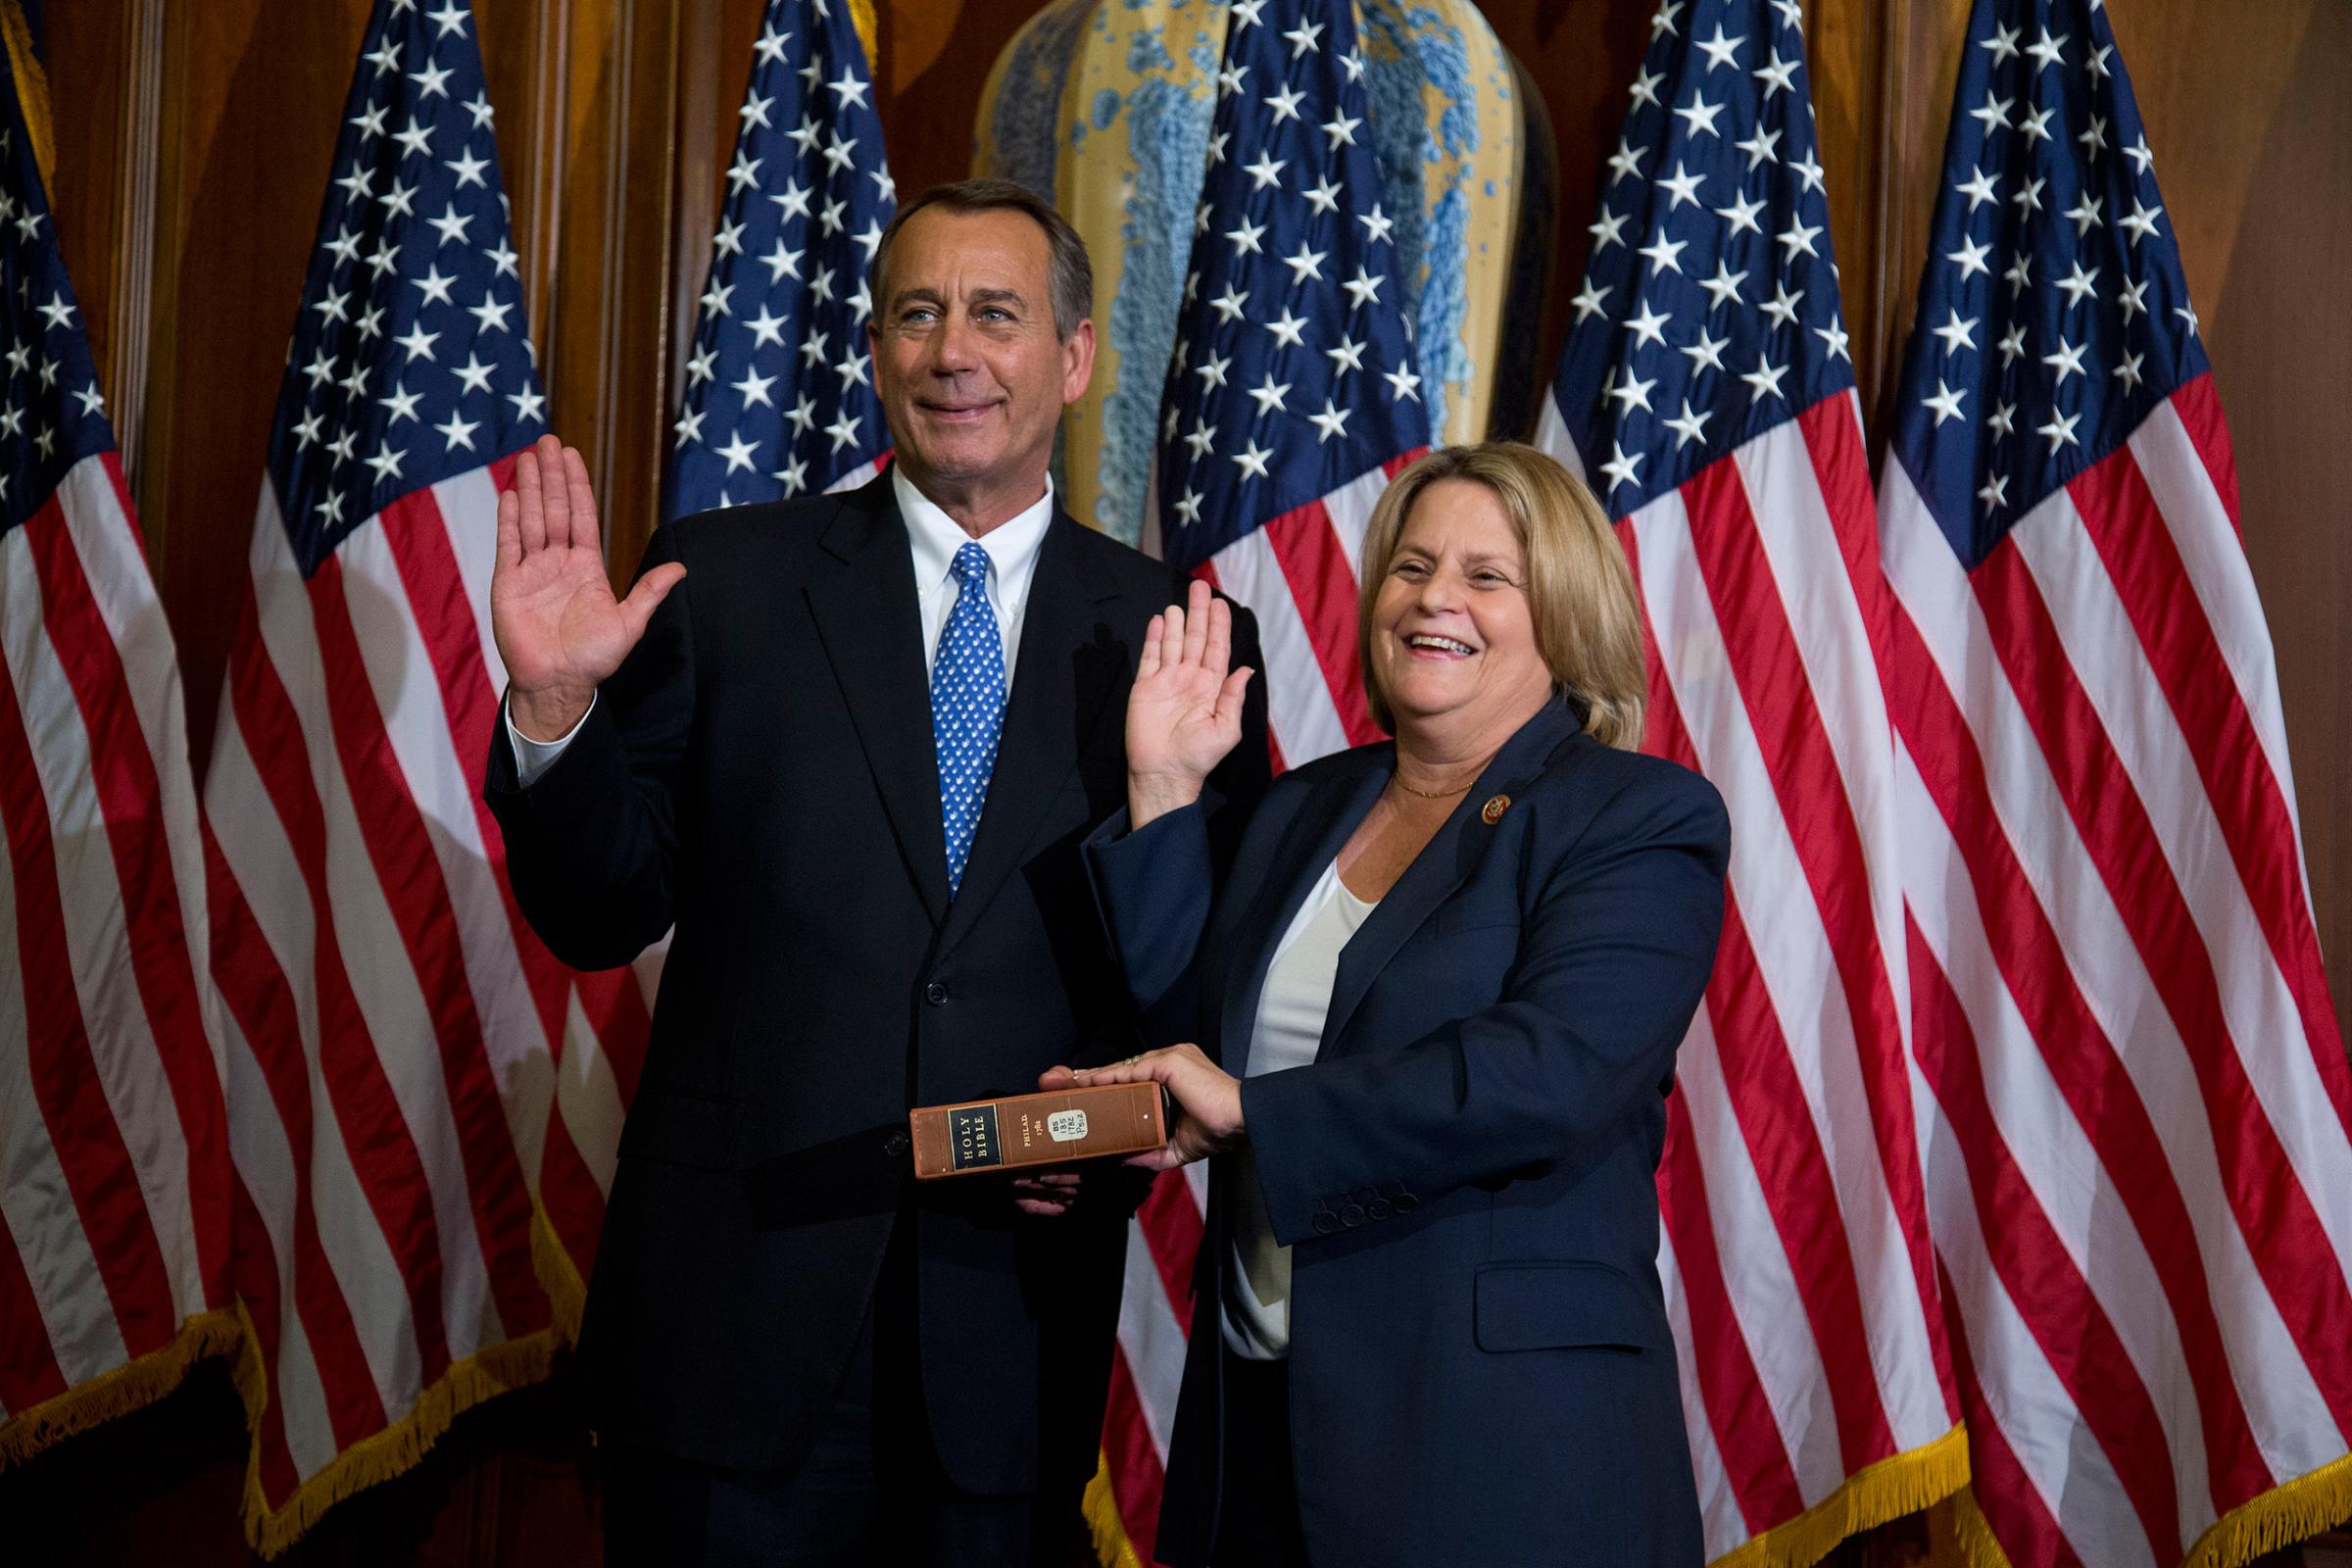 House Speaker John Boehner of Ohio performs a mock swearing in for Rep. Ileana Ros-Lehtinen, R-Fla., Thursday, Jan. 3, 2013, on Capitol Hill in Washington as the 113th Congress began.